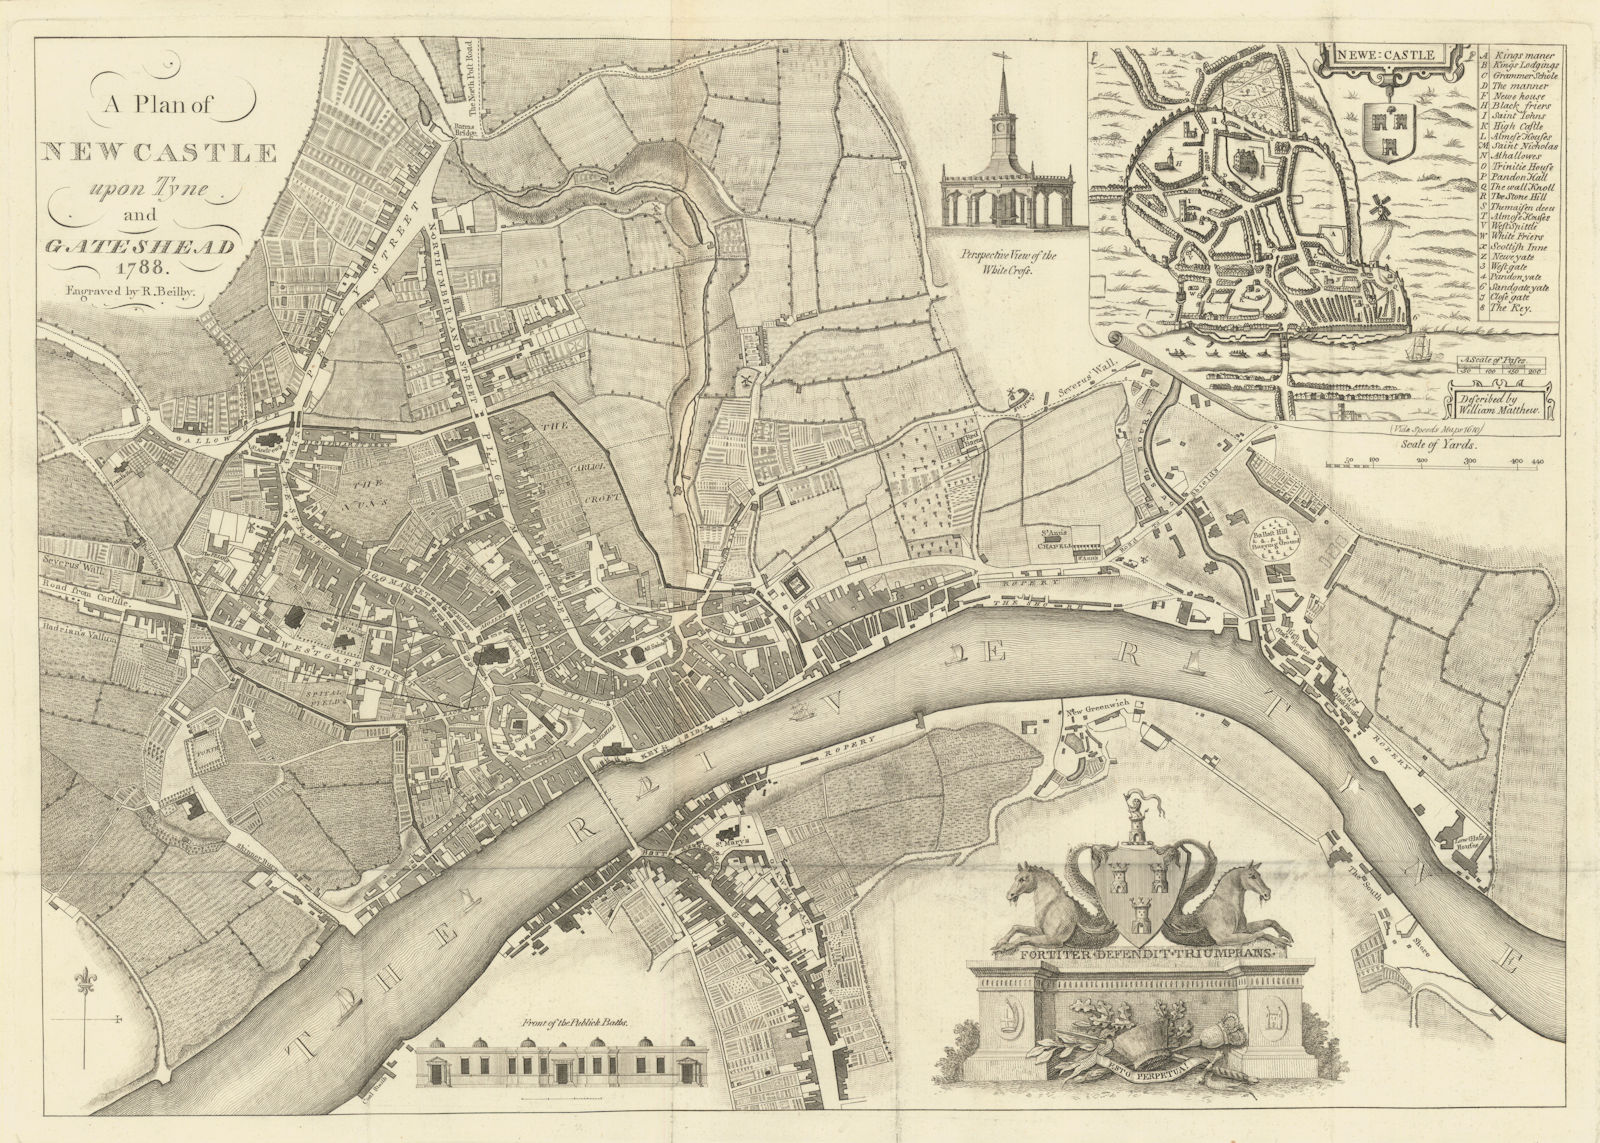 Plan of Newcastle upon Tyne and Gateshead 1788. Engraved by R. Beilby 1789 map